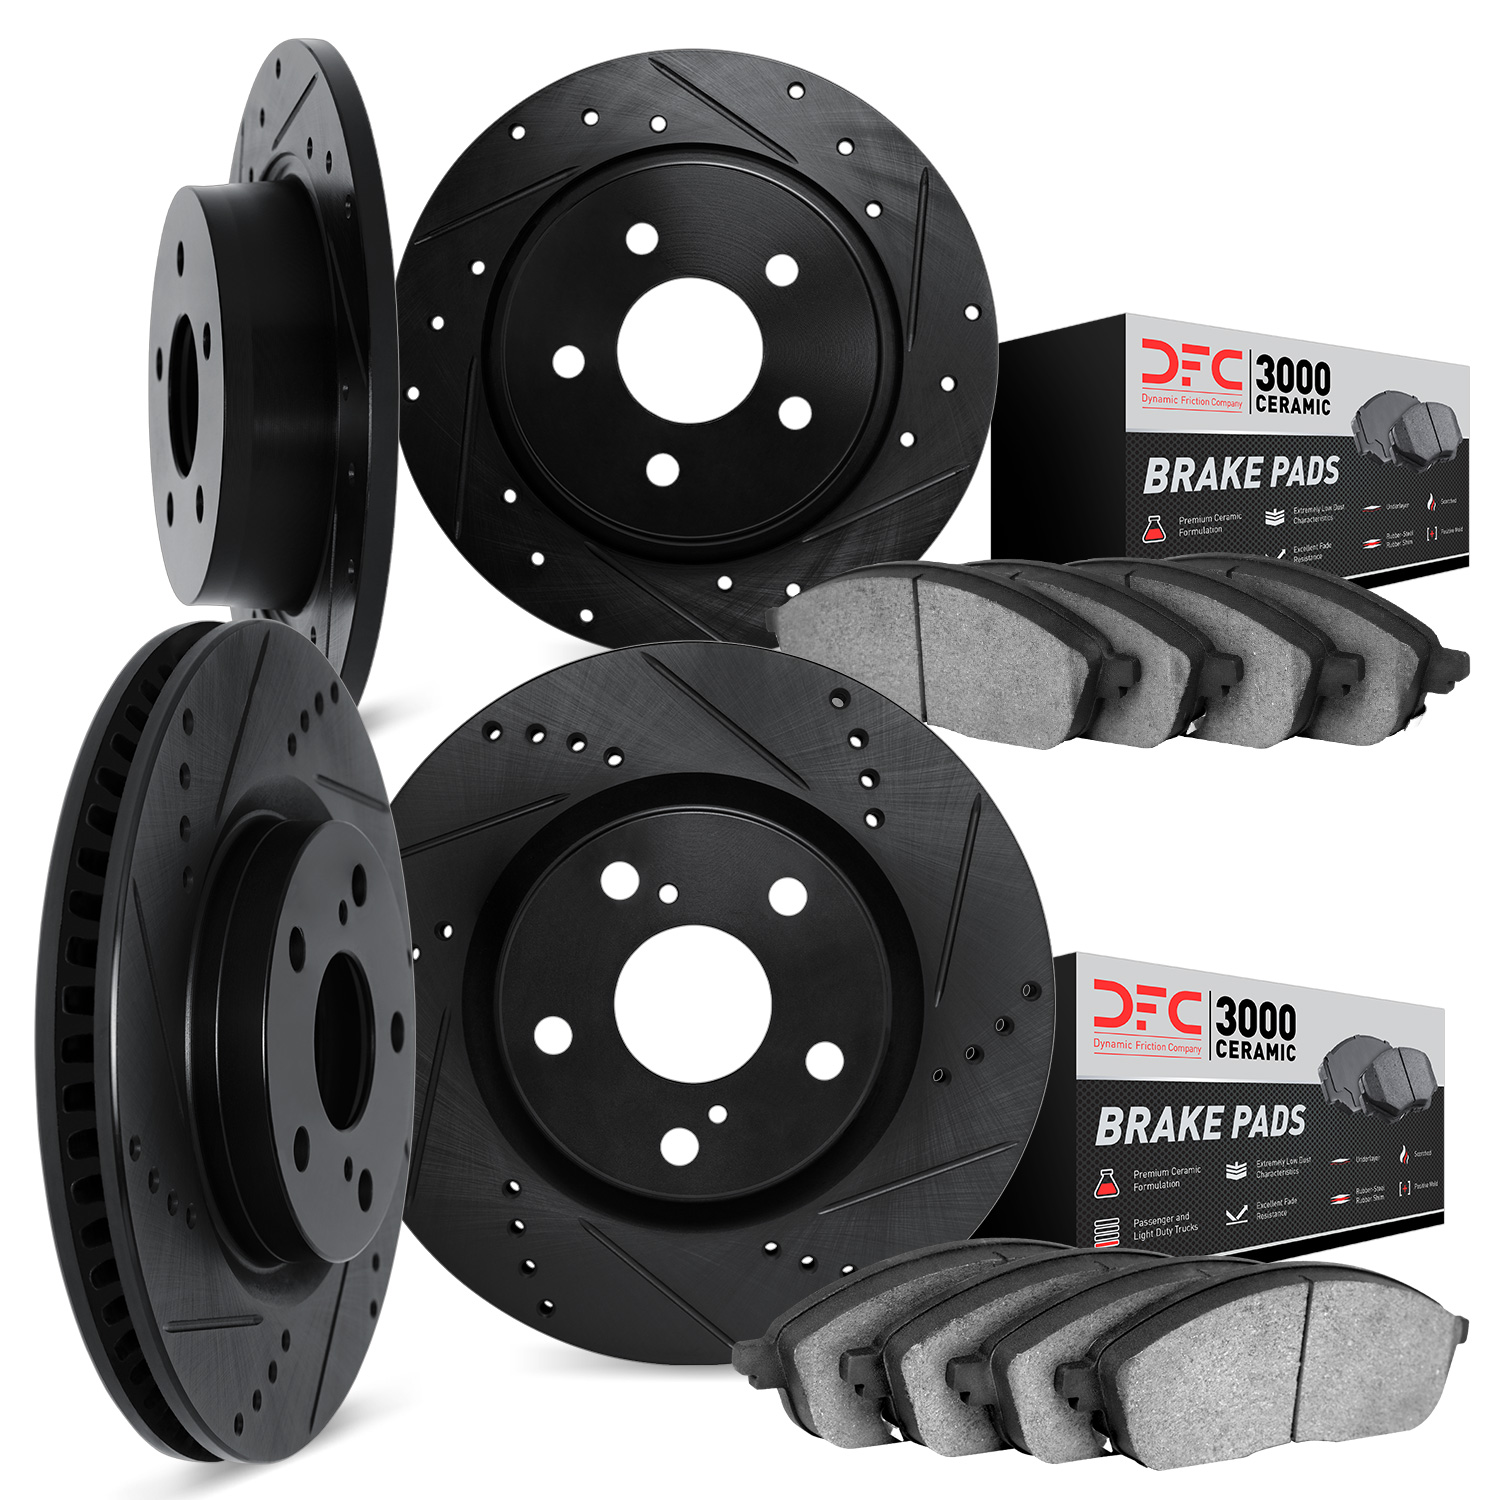 8304-59042 Drilled/Slotted Brake Rotors with 3000-Series Ceramic Brake Pads Kit [Black], 2016-2021 Acura/Honda, Position: Front